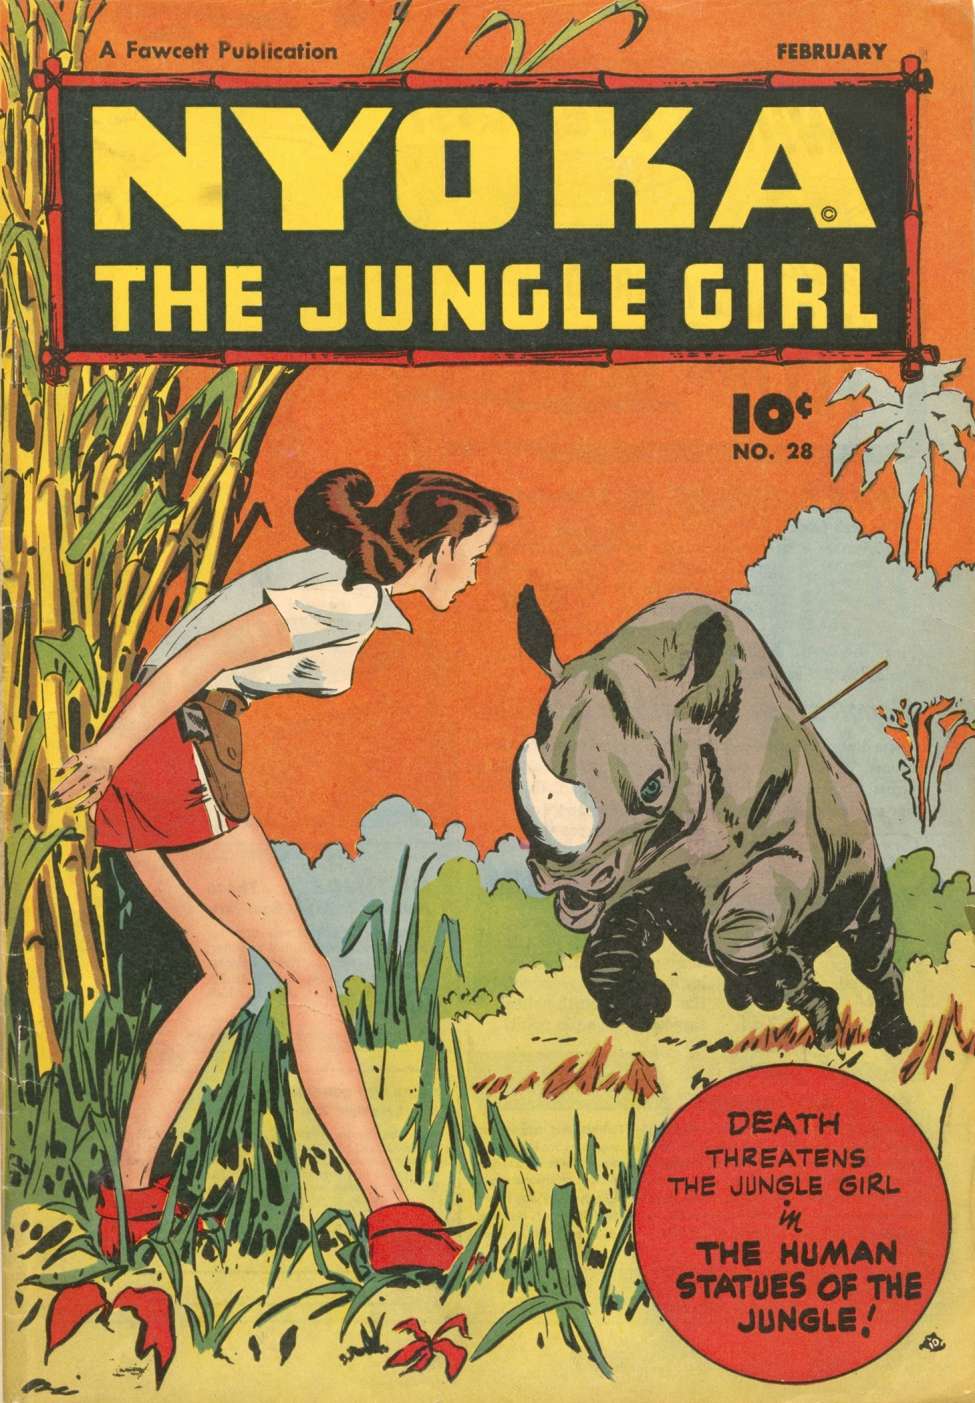 Book Cover For Nyoka the Jungle Girl 28 - Version 2